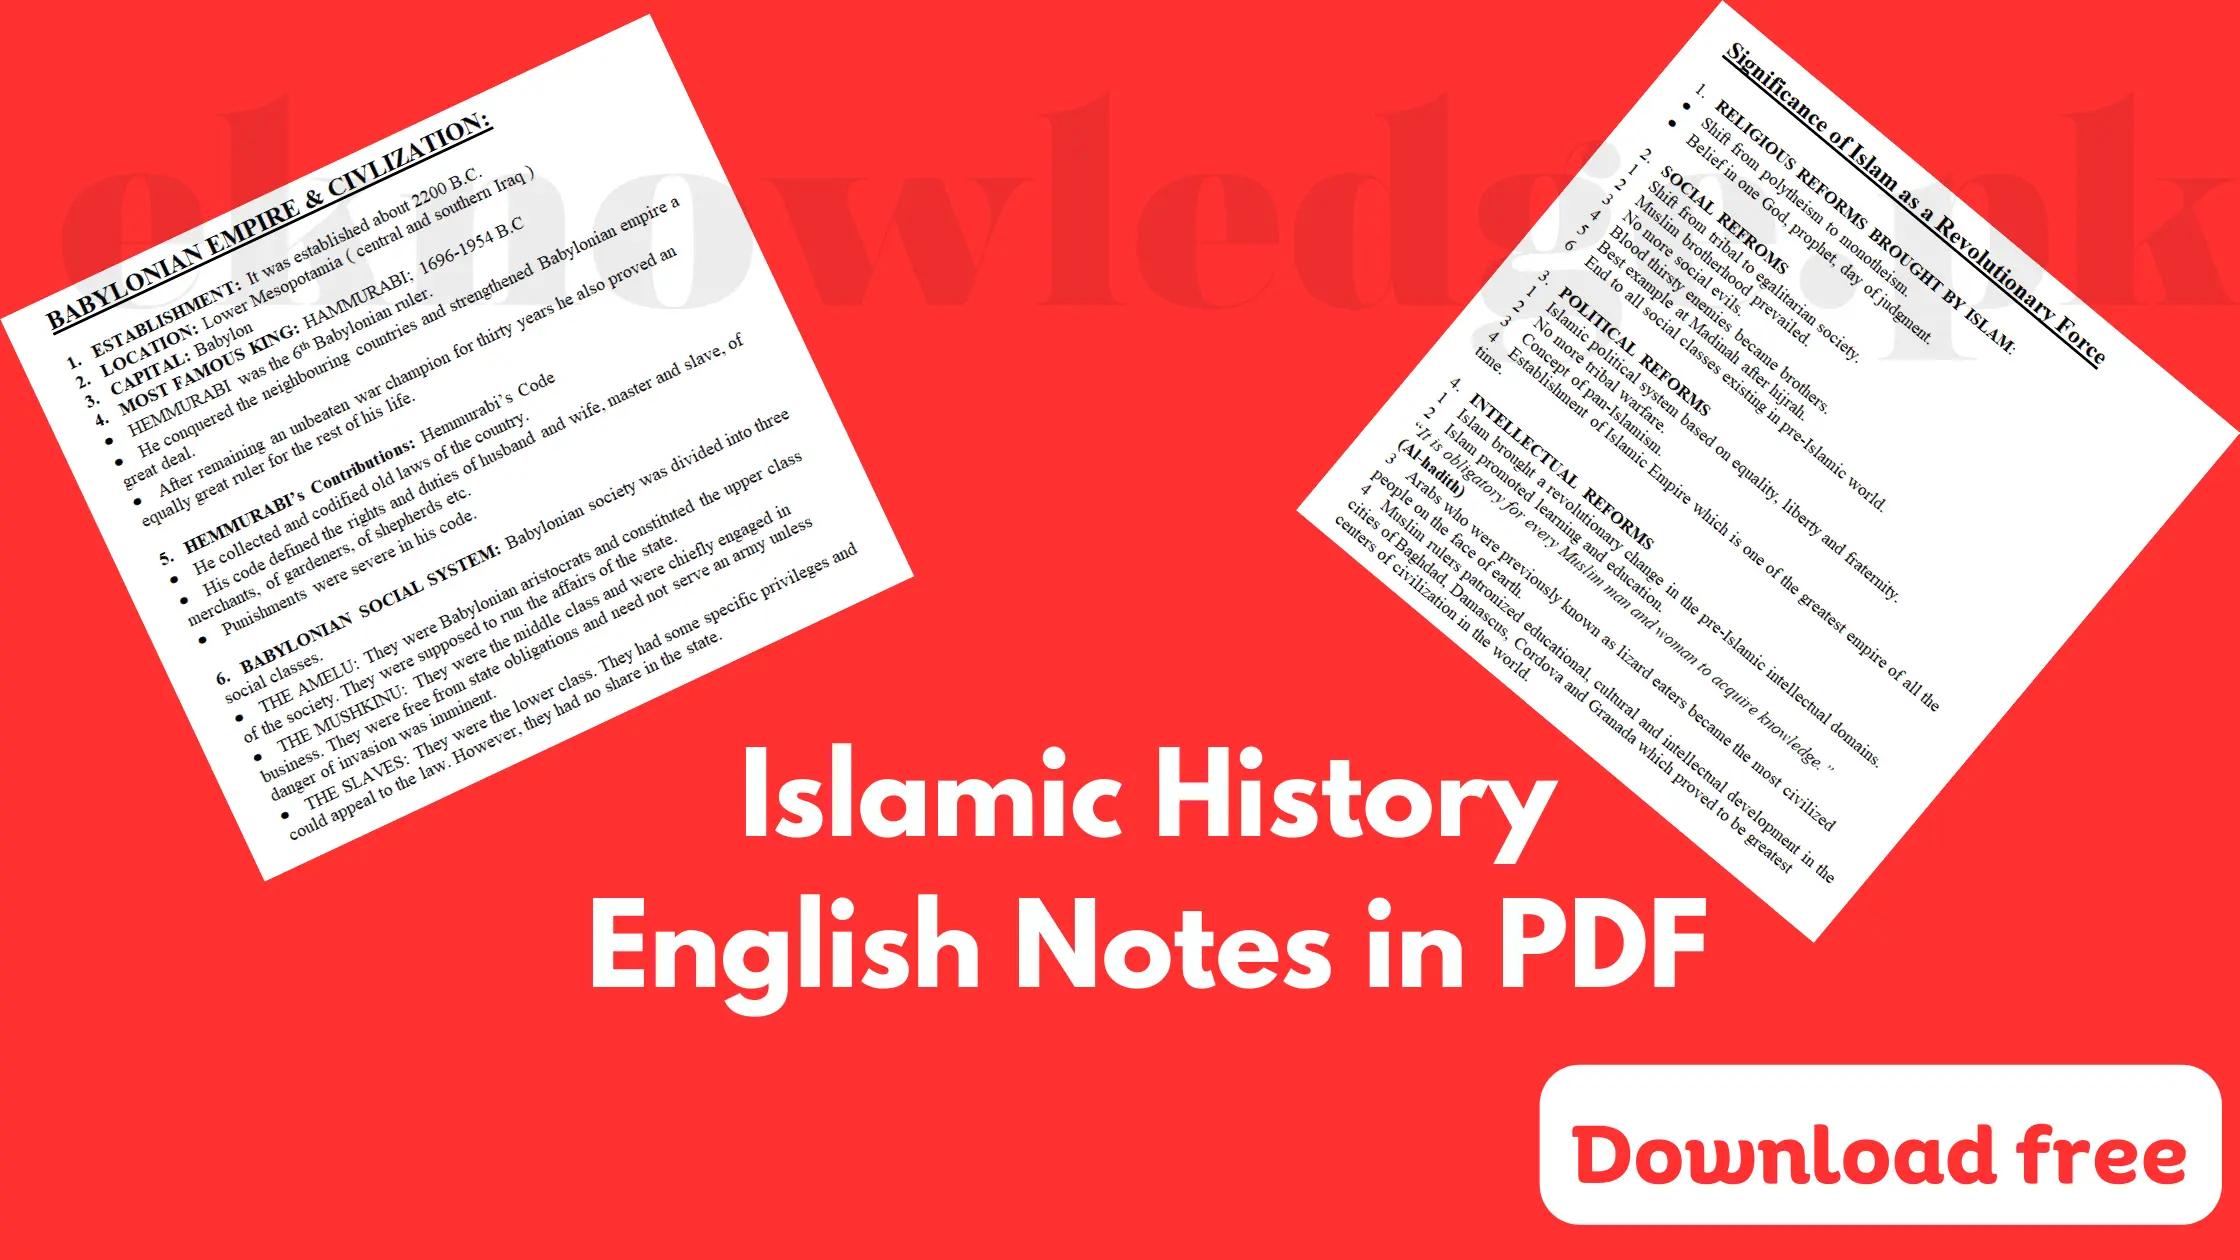 Islamic History English Notes in PDF